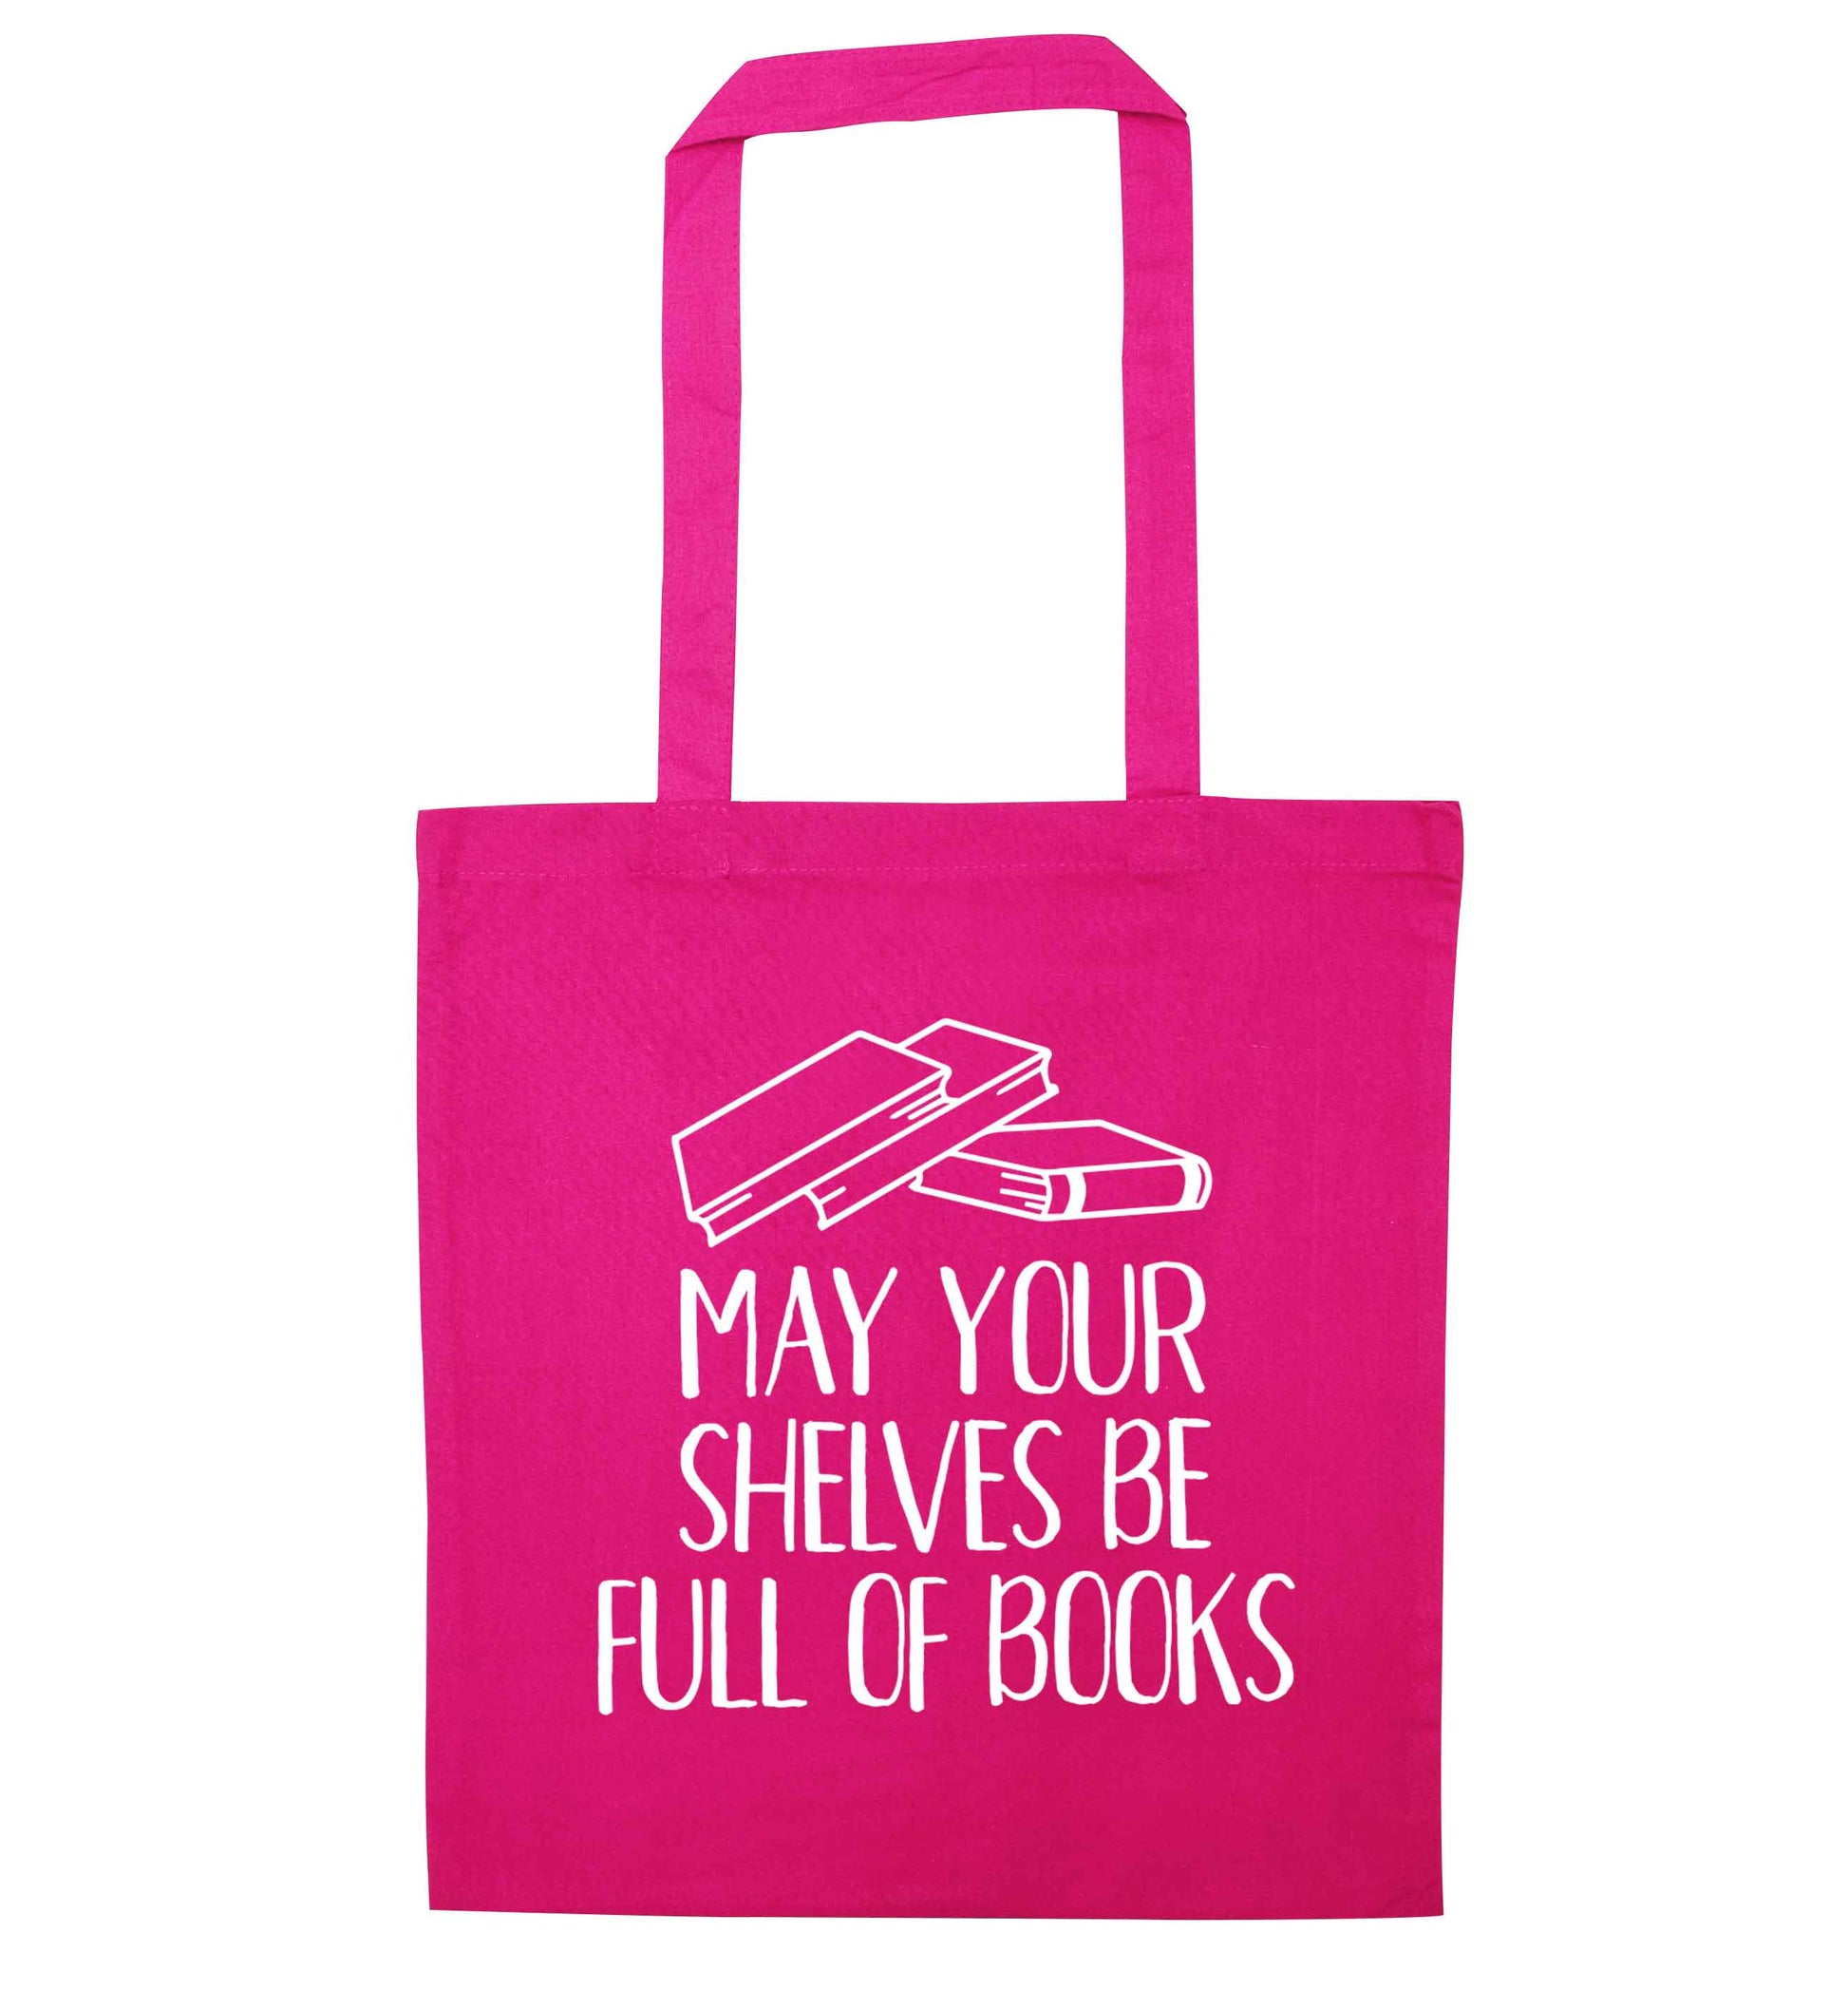 May your shelves be full of books pink tote bag